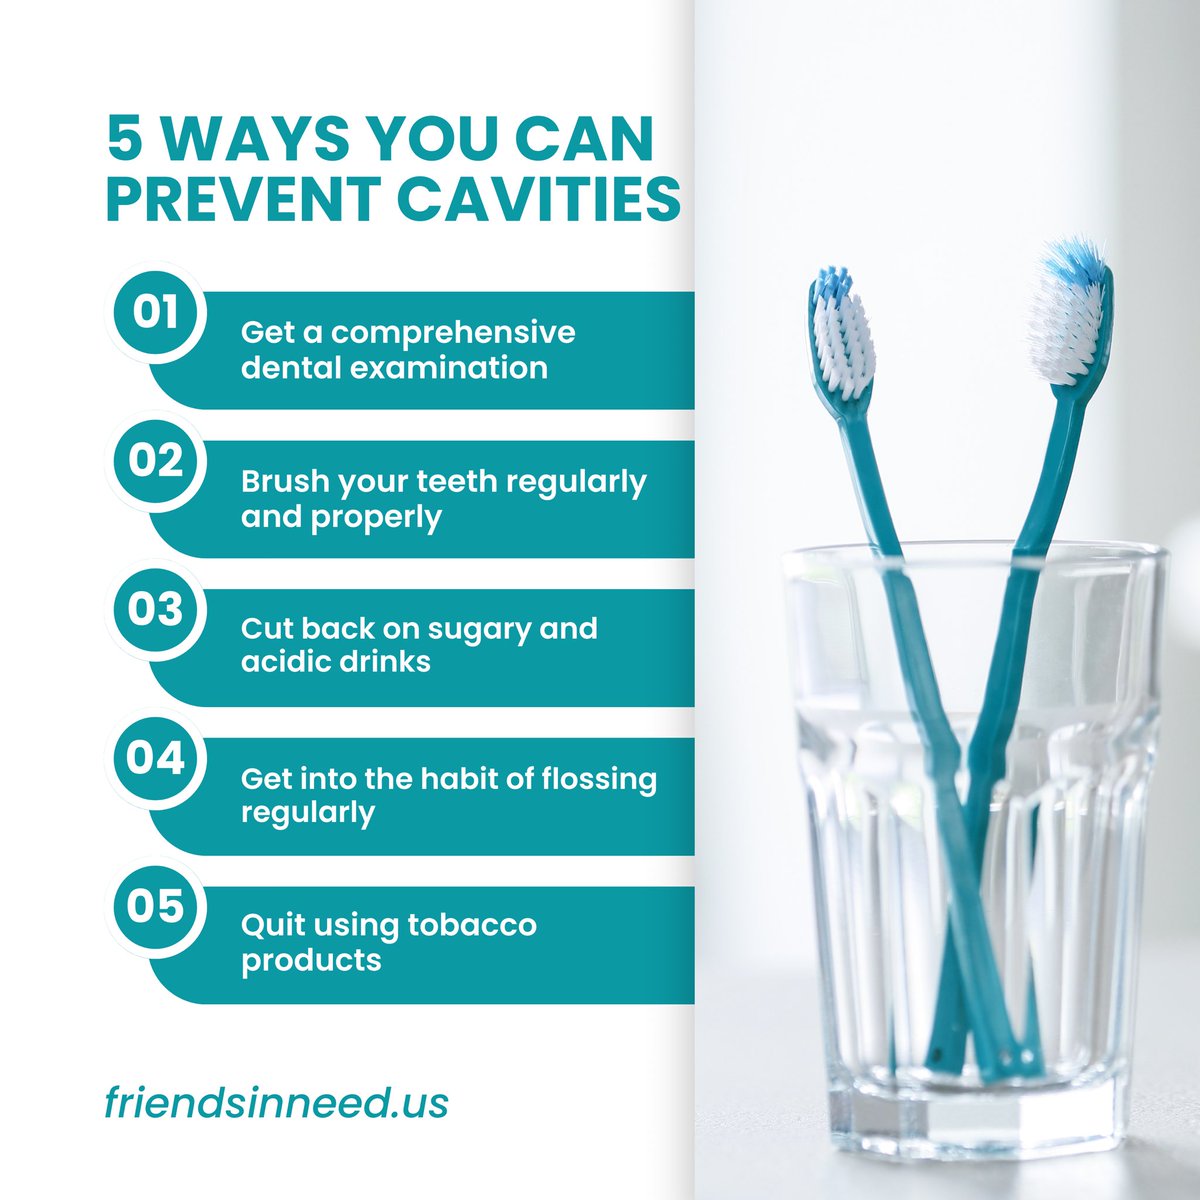 Cavities, or tooth decay, can be caused by things such as eating sugary foods, drinking sugary drinks, using tobacco products and improper hygiene. 
#cavities #cavityfilling #dentalcavities #dentalcavity #toothdecay #oralhealth #oralhygienetips #oralhygeine #dental #tn